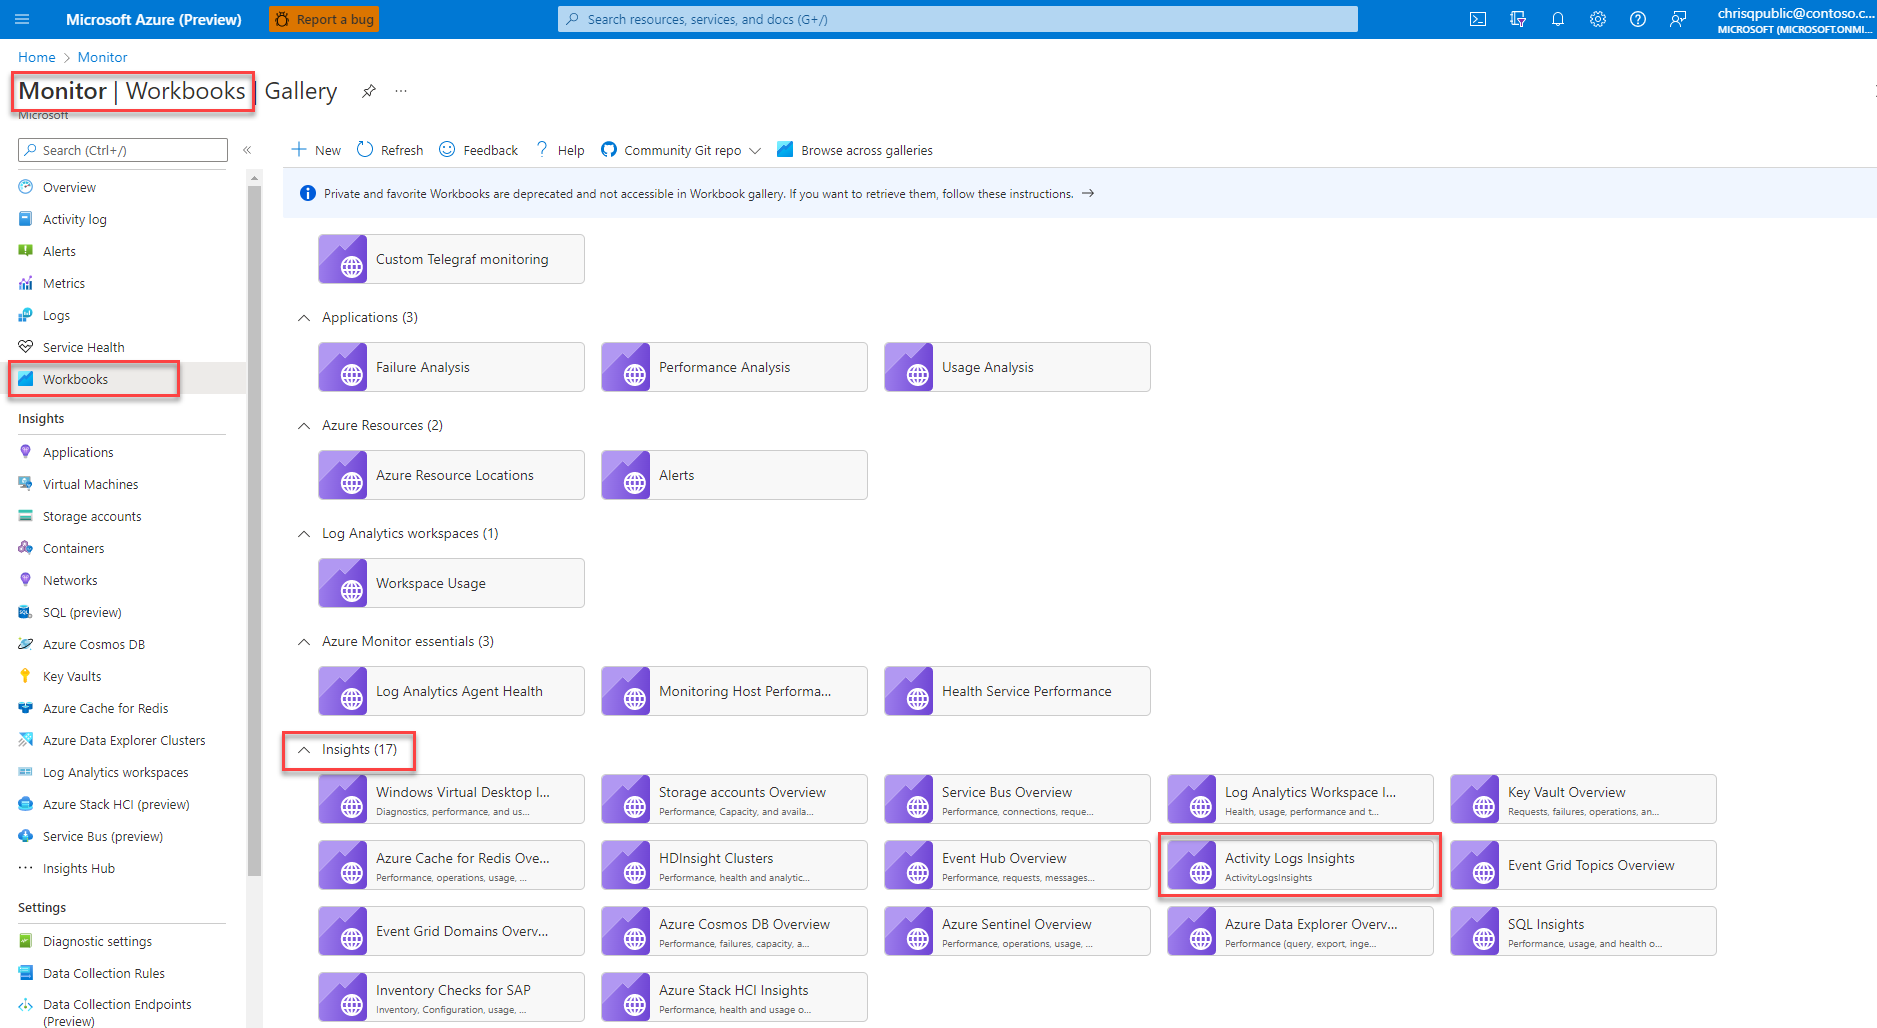 A screenshot showing how to locate and open the Activity logs insights workbook on a scale level.